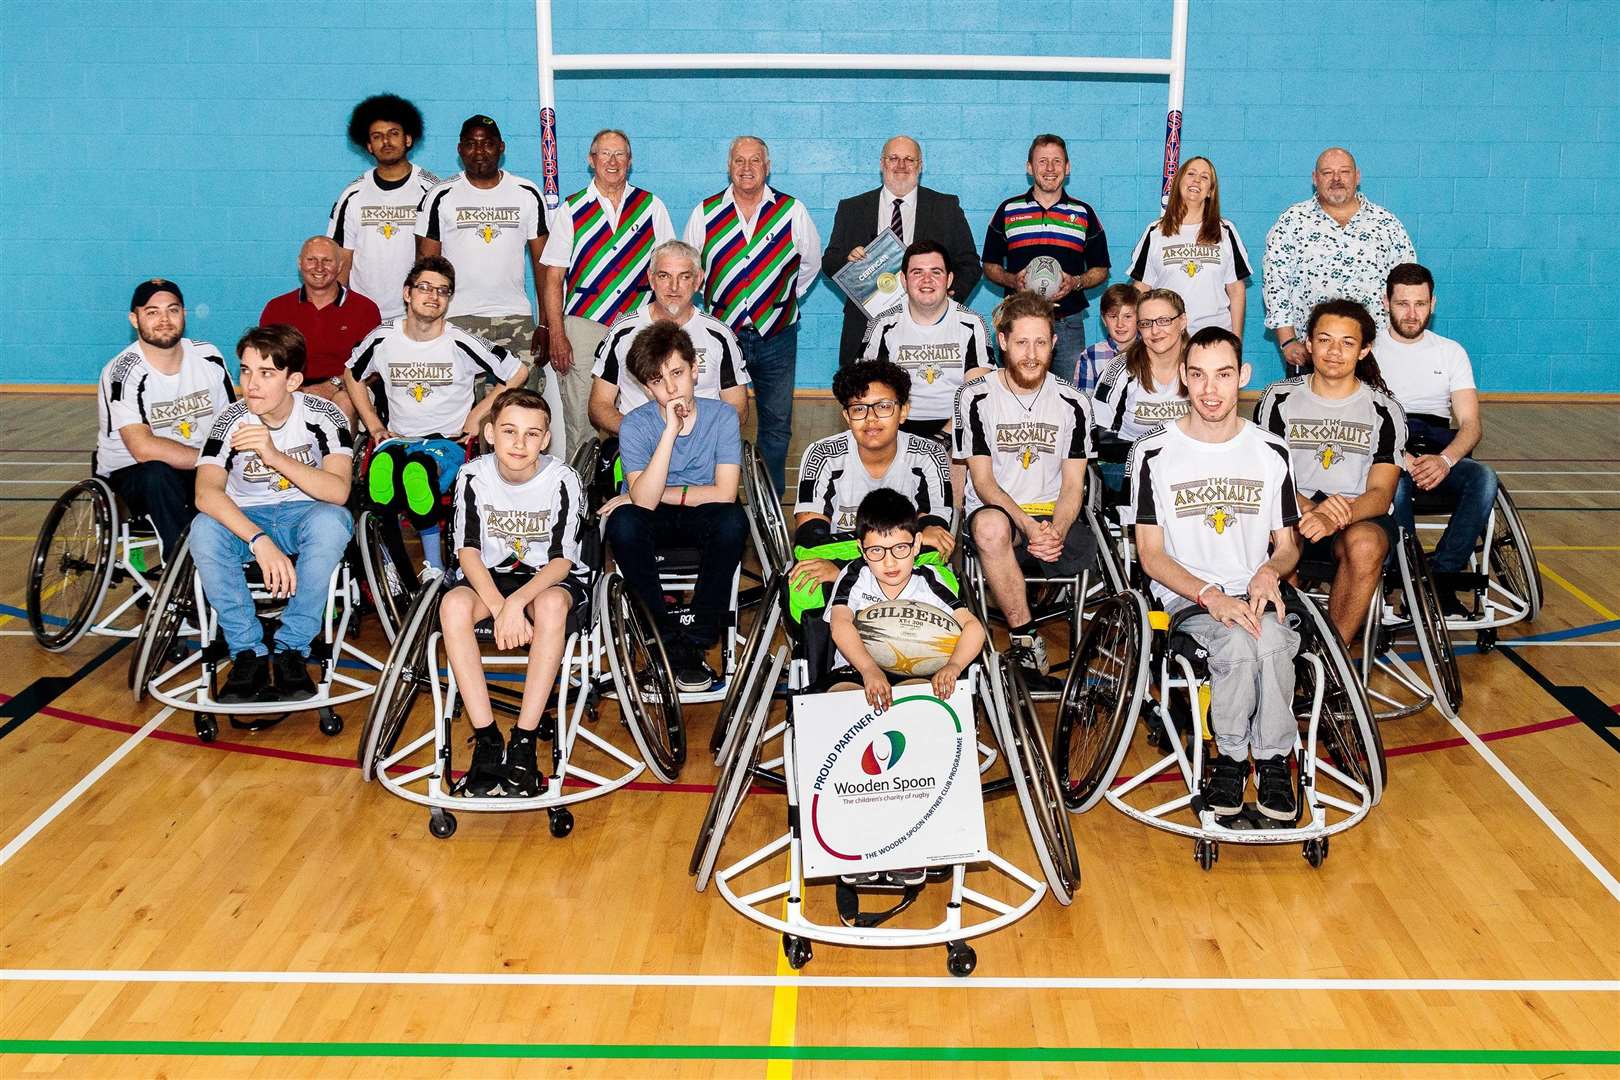 The Argonauts Wheelchair Sports Charity welcomed delegates to see their new equipment in use. Picture Credit: Bresser Photography & Digital Media (1705858)